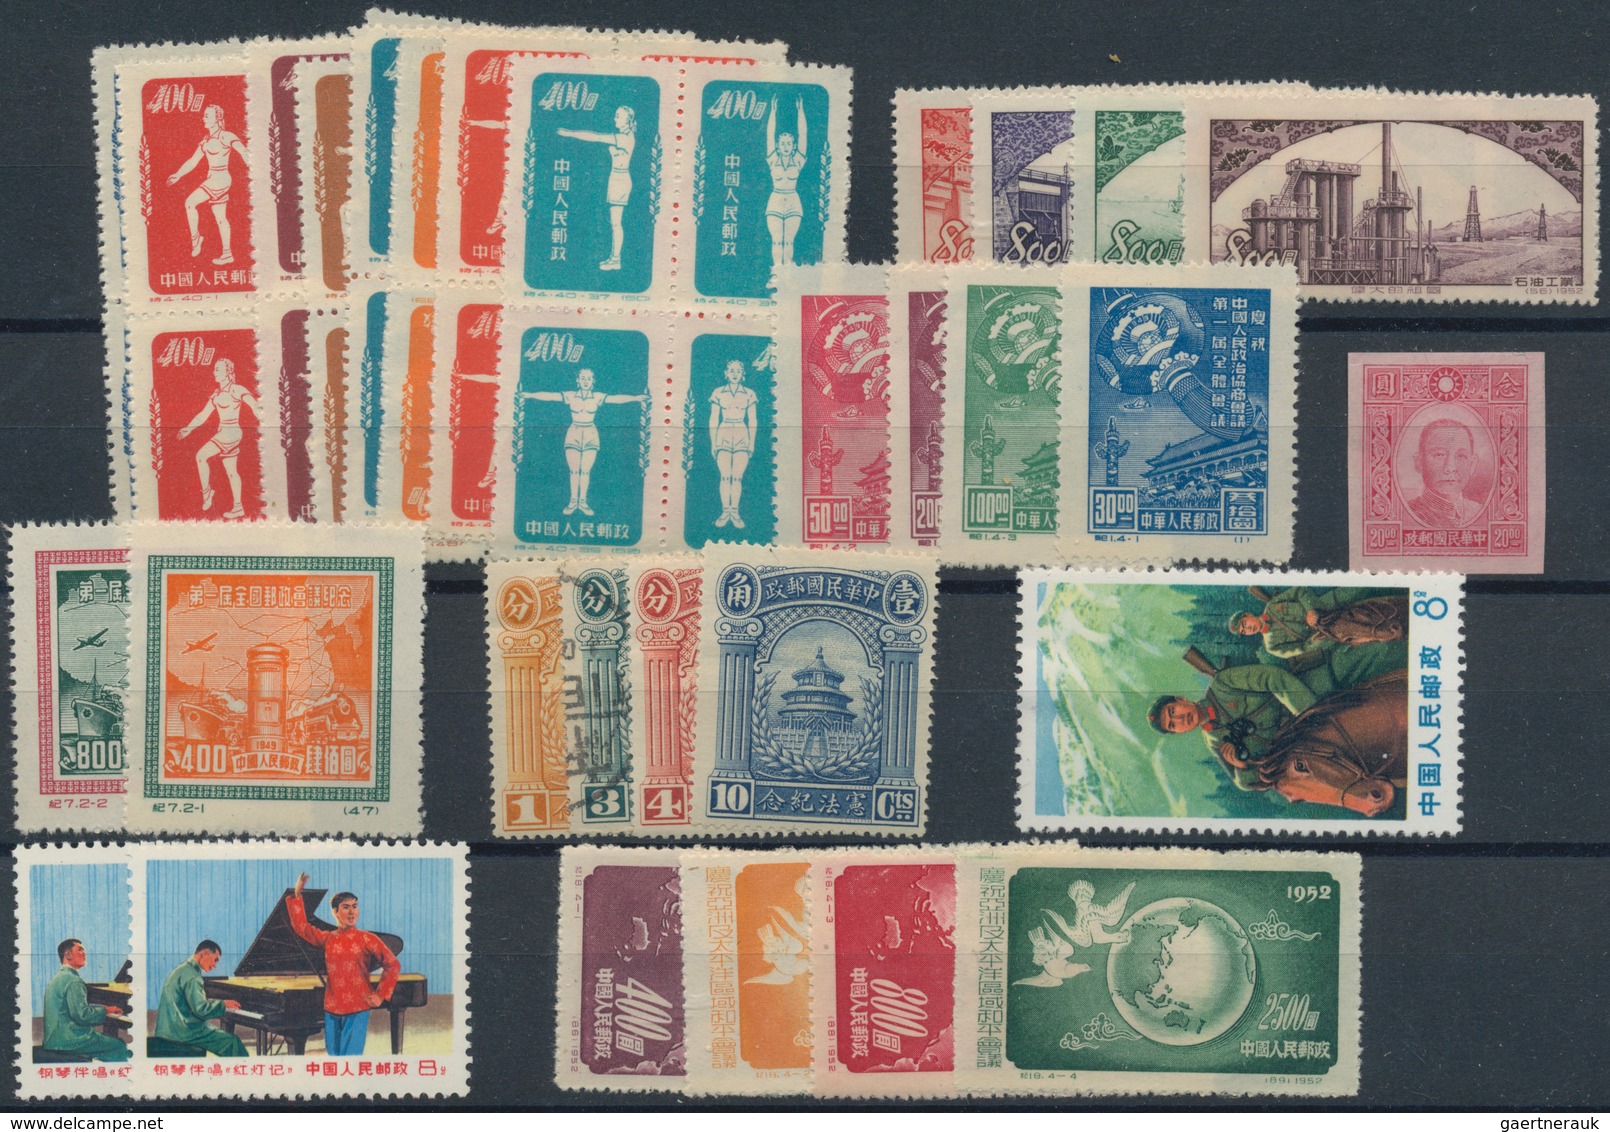 China - Volksrepublik: 1885/1970 (ca.), mint and used collection/assortment on album pages/stockcard